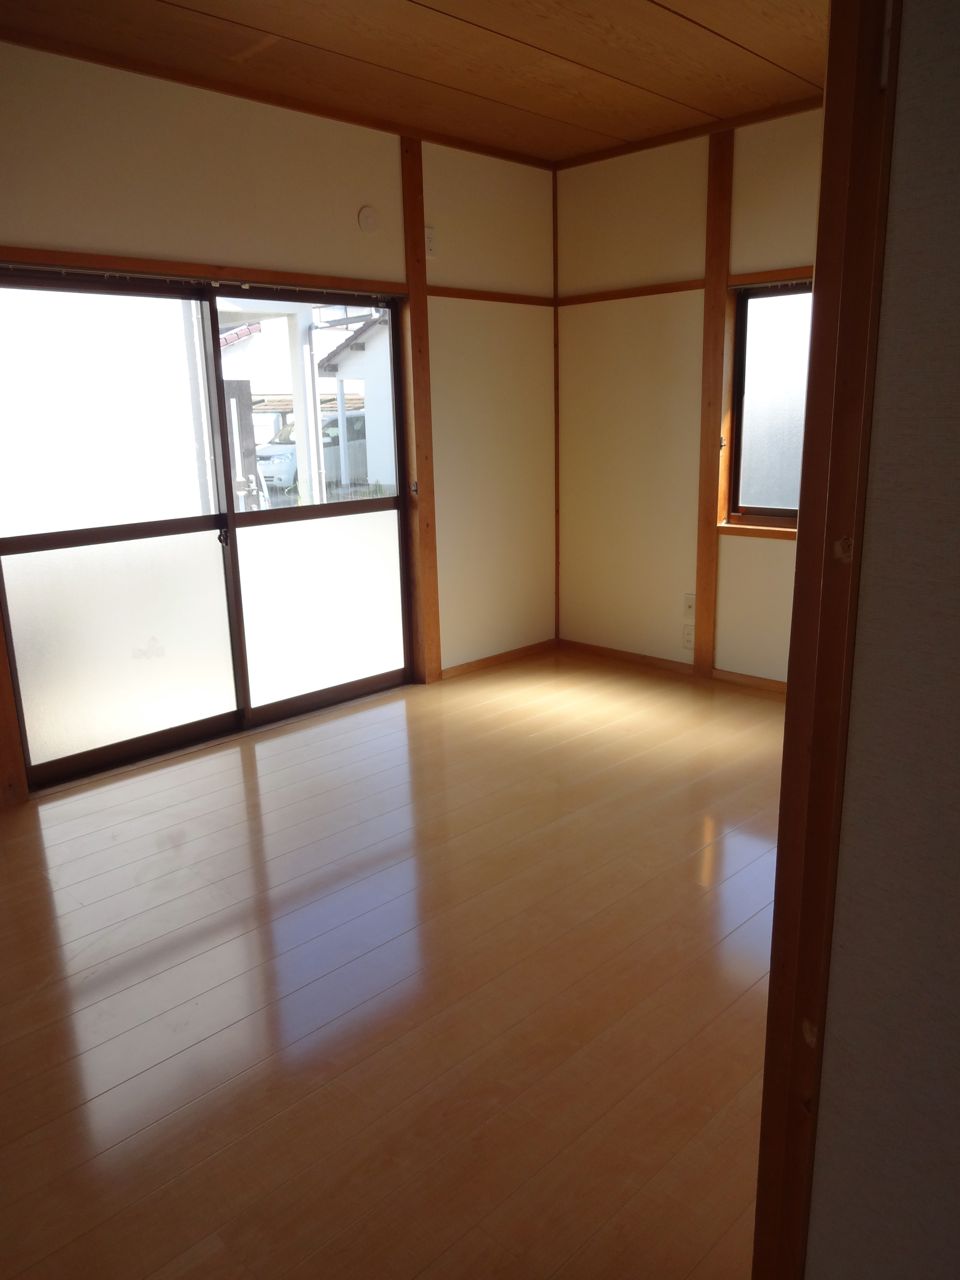 Other room space. 1F of the Japanese-style room was in flooring